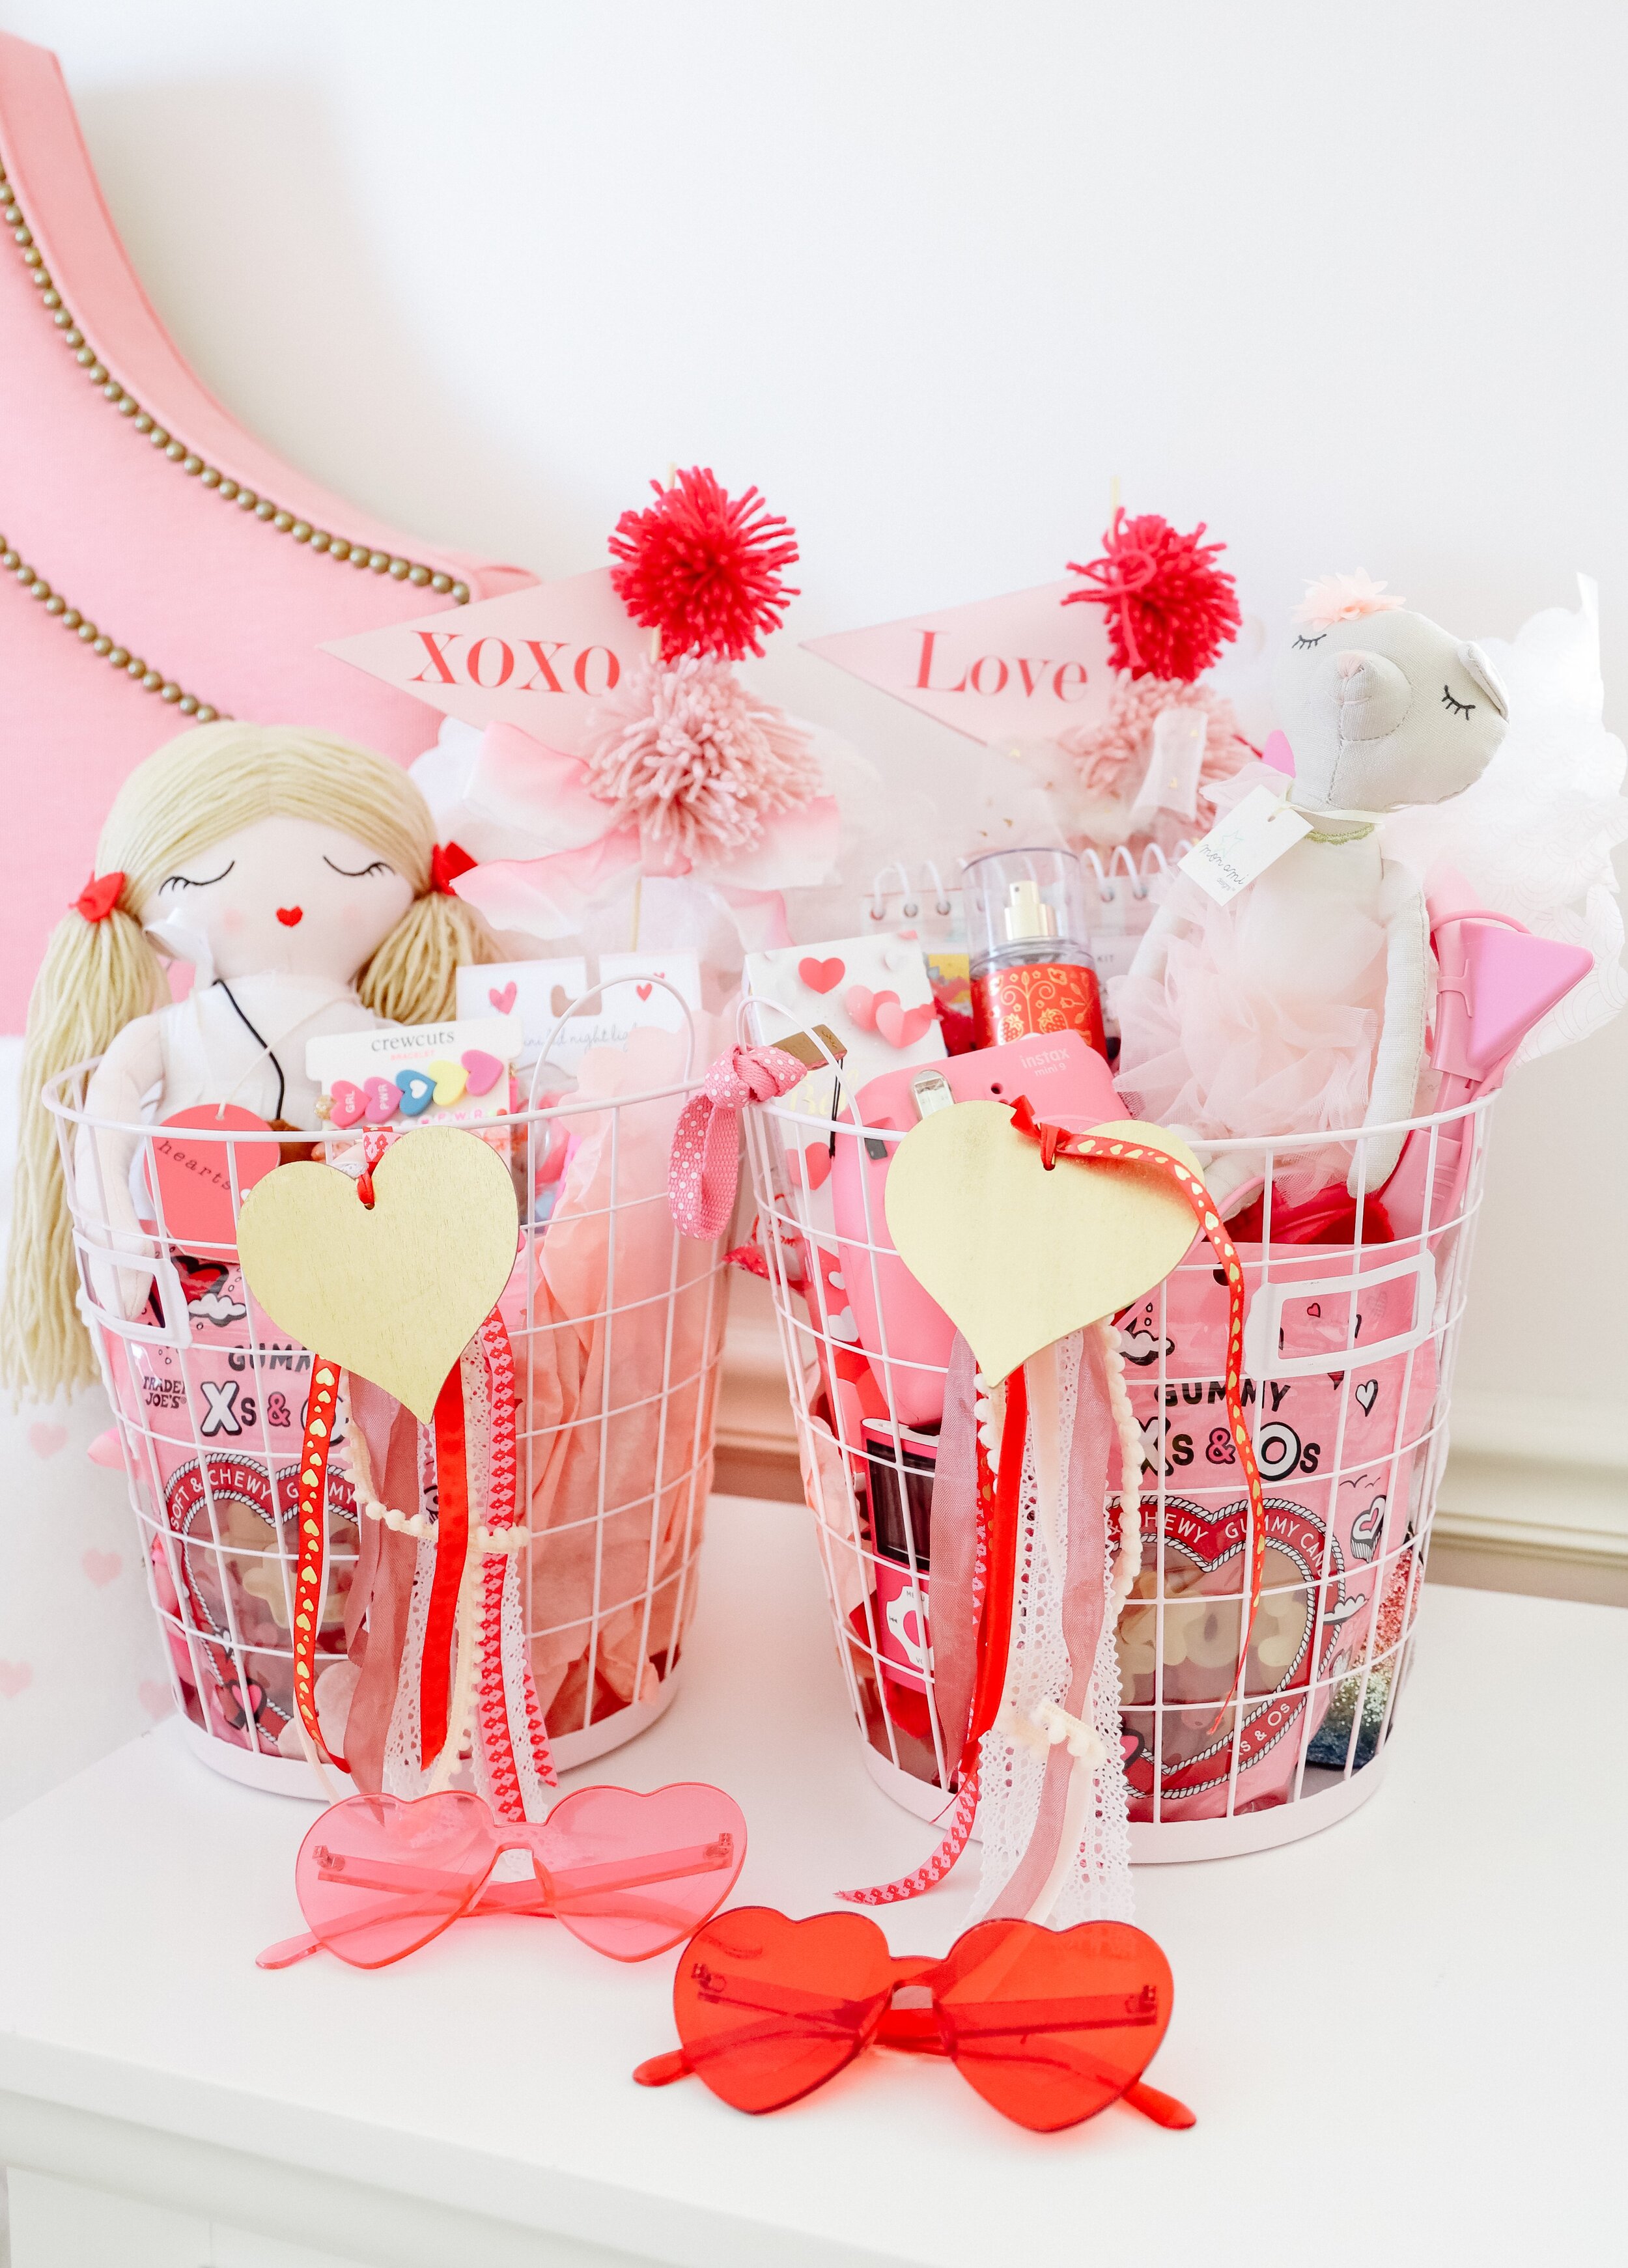 Valentine's Day Basket Ideas for Kids - About A Mom  Valentines day baskets,  Valentine's day gift baskets, Valentine gift baskets